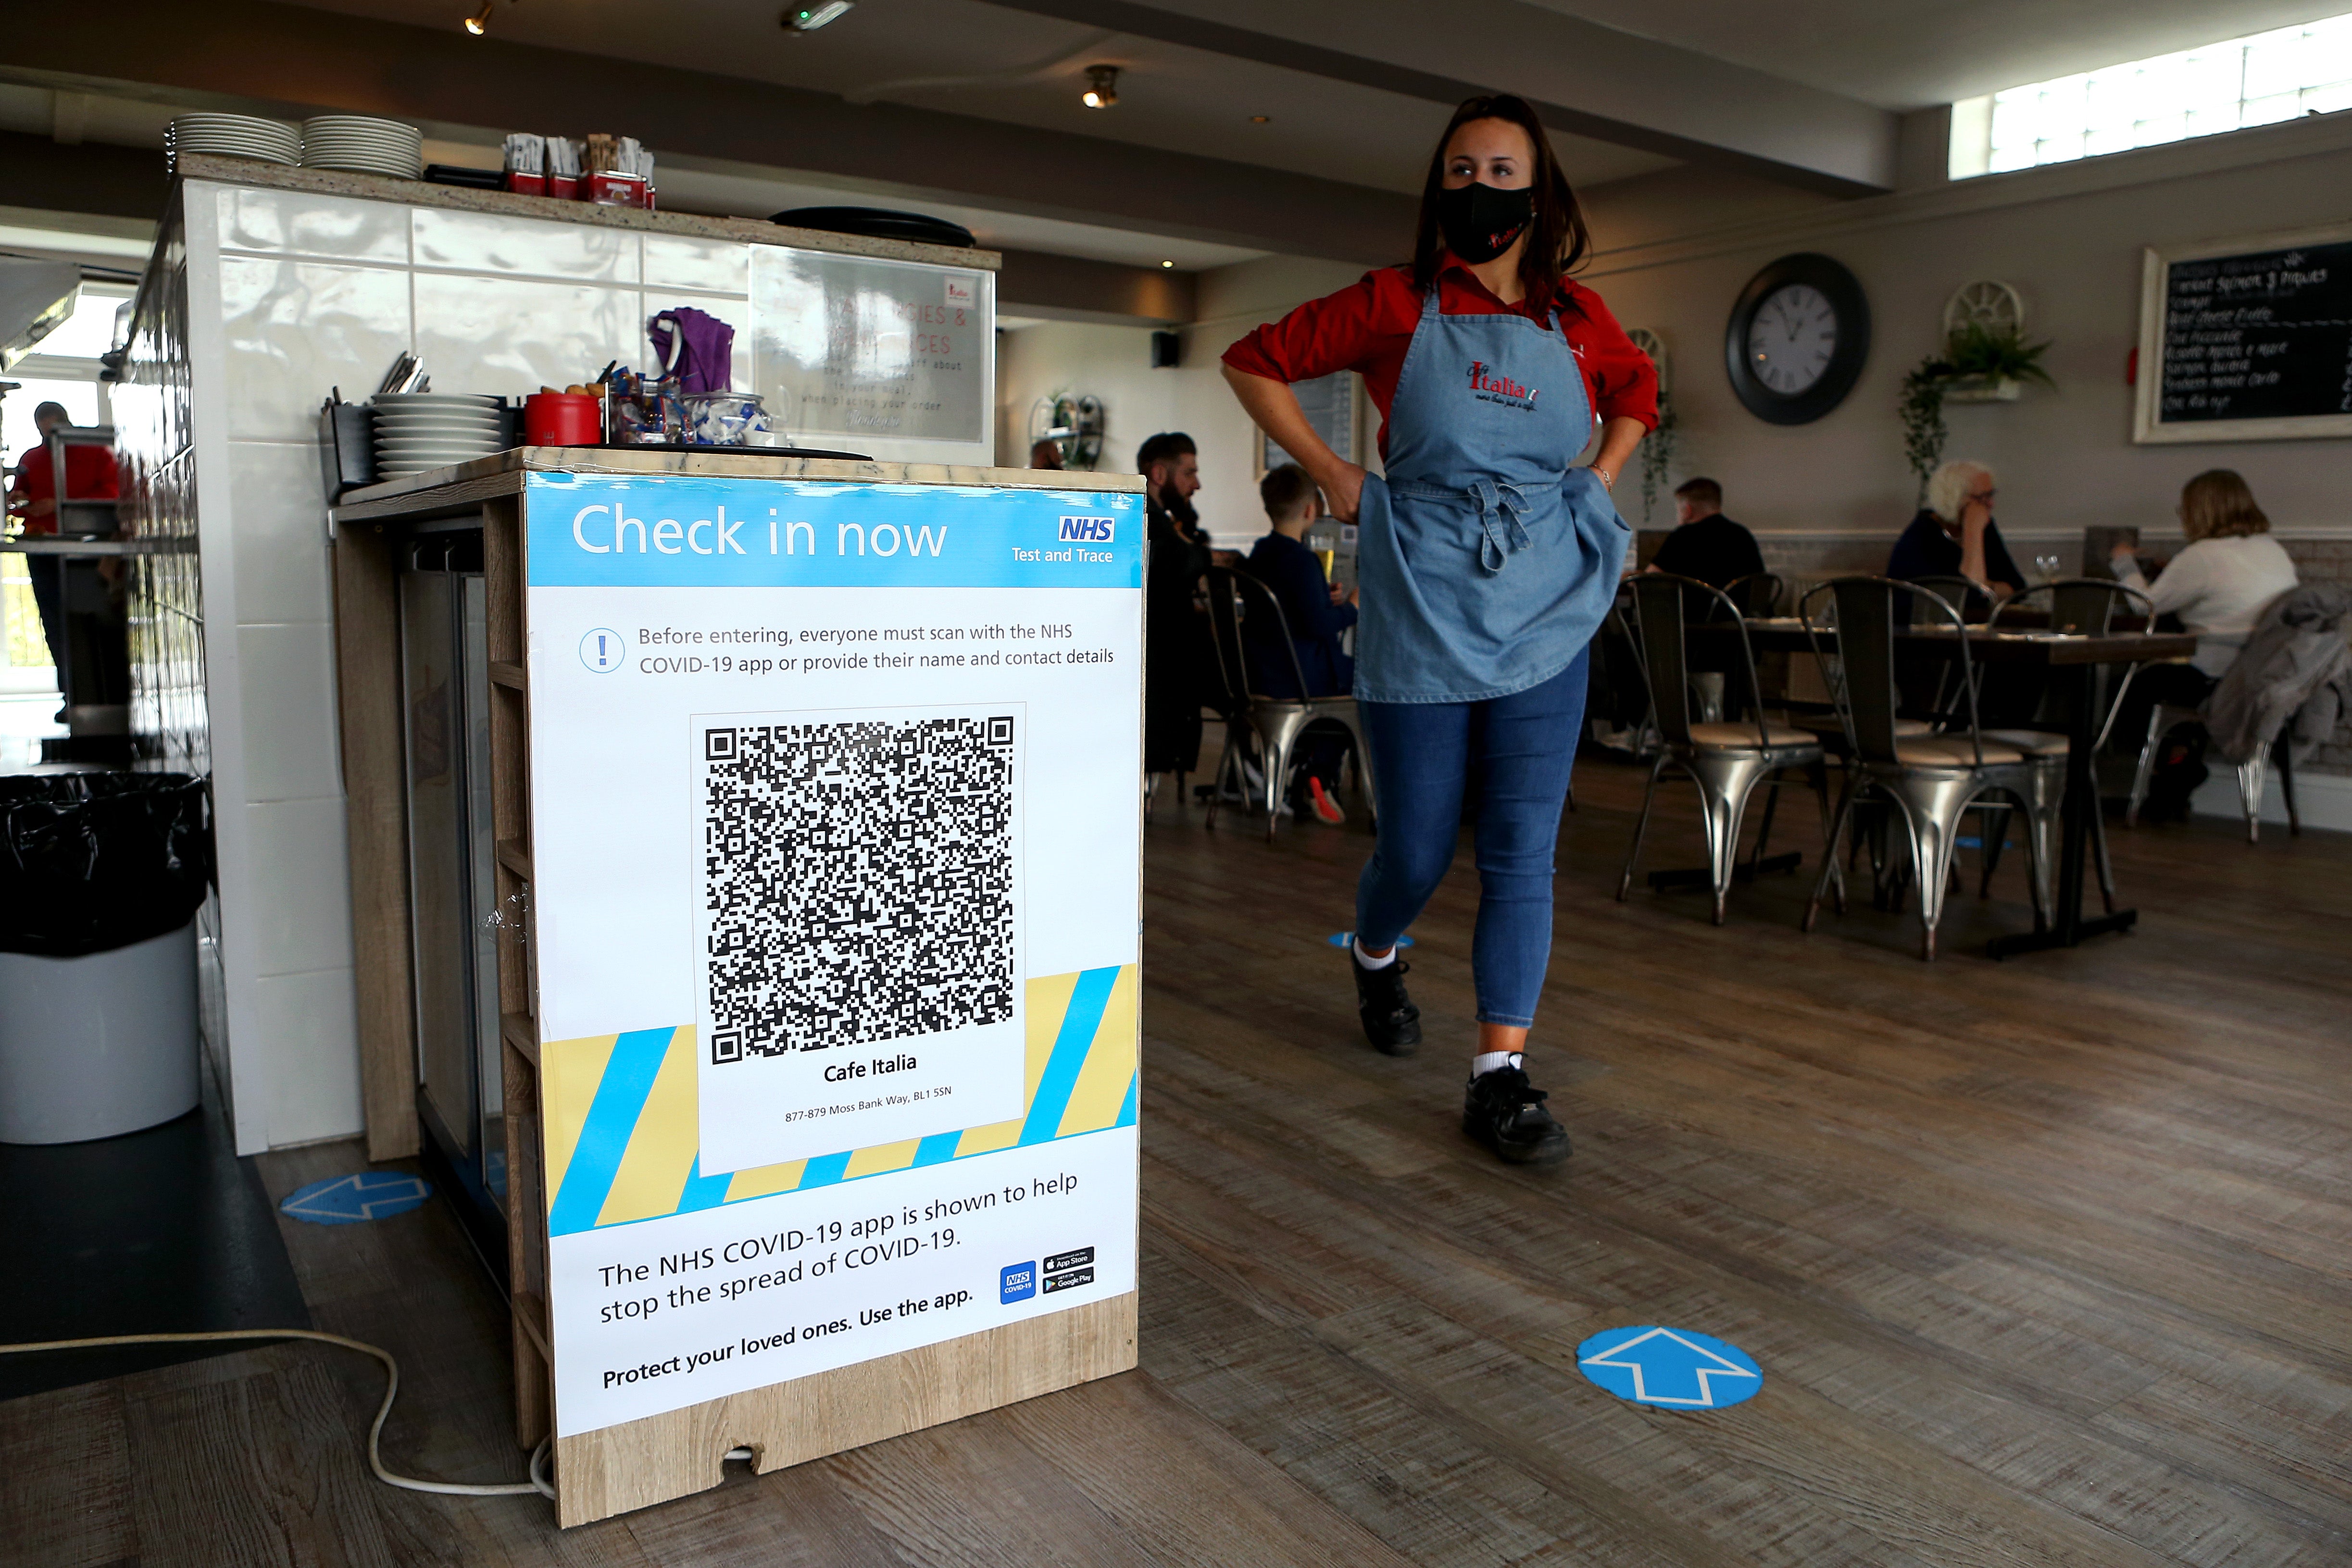 An NHS track and trace QR code is seen on a wall inside Cafe Italia as indoor hospitality returns, however, fears of new variants are mounting